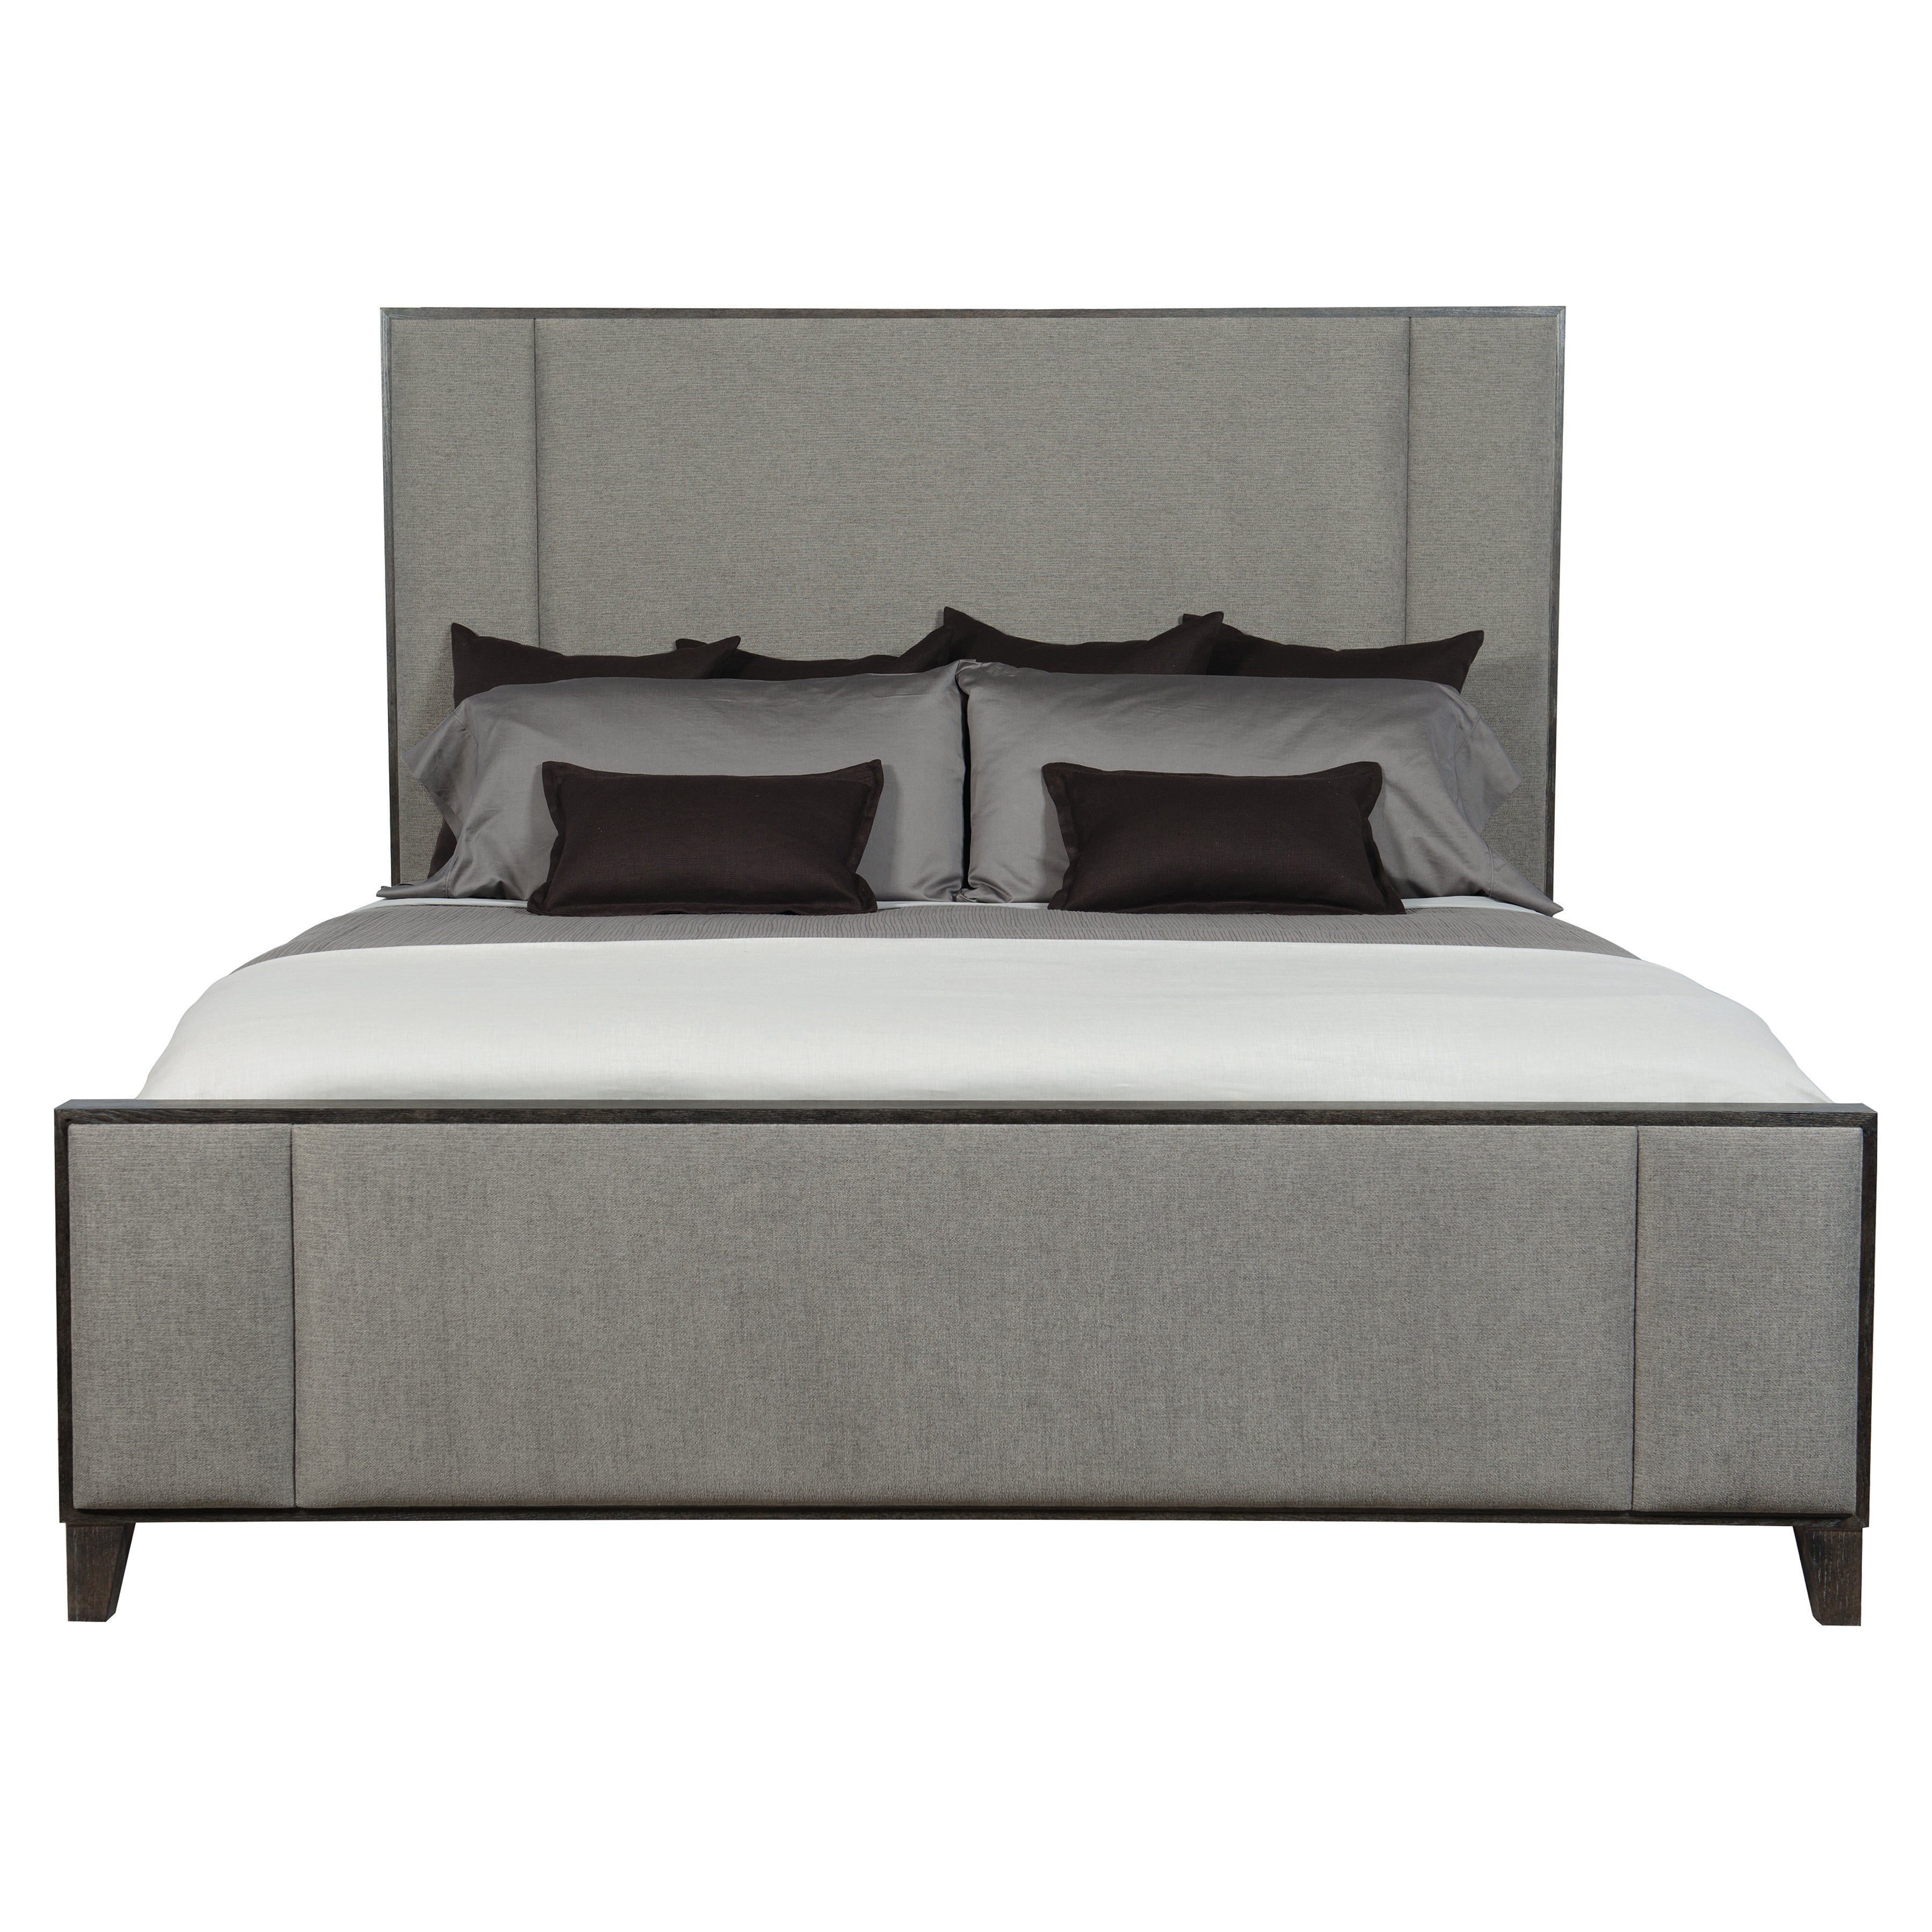 Linea California King Panel Bed with Upholstered Headboard and Footboard in Cerused Charcoal Finish